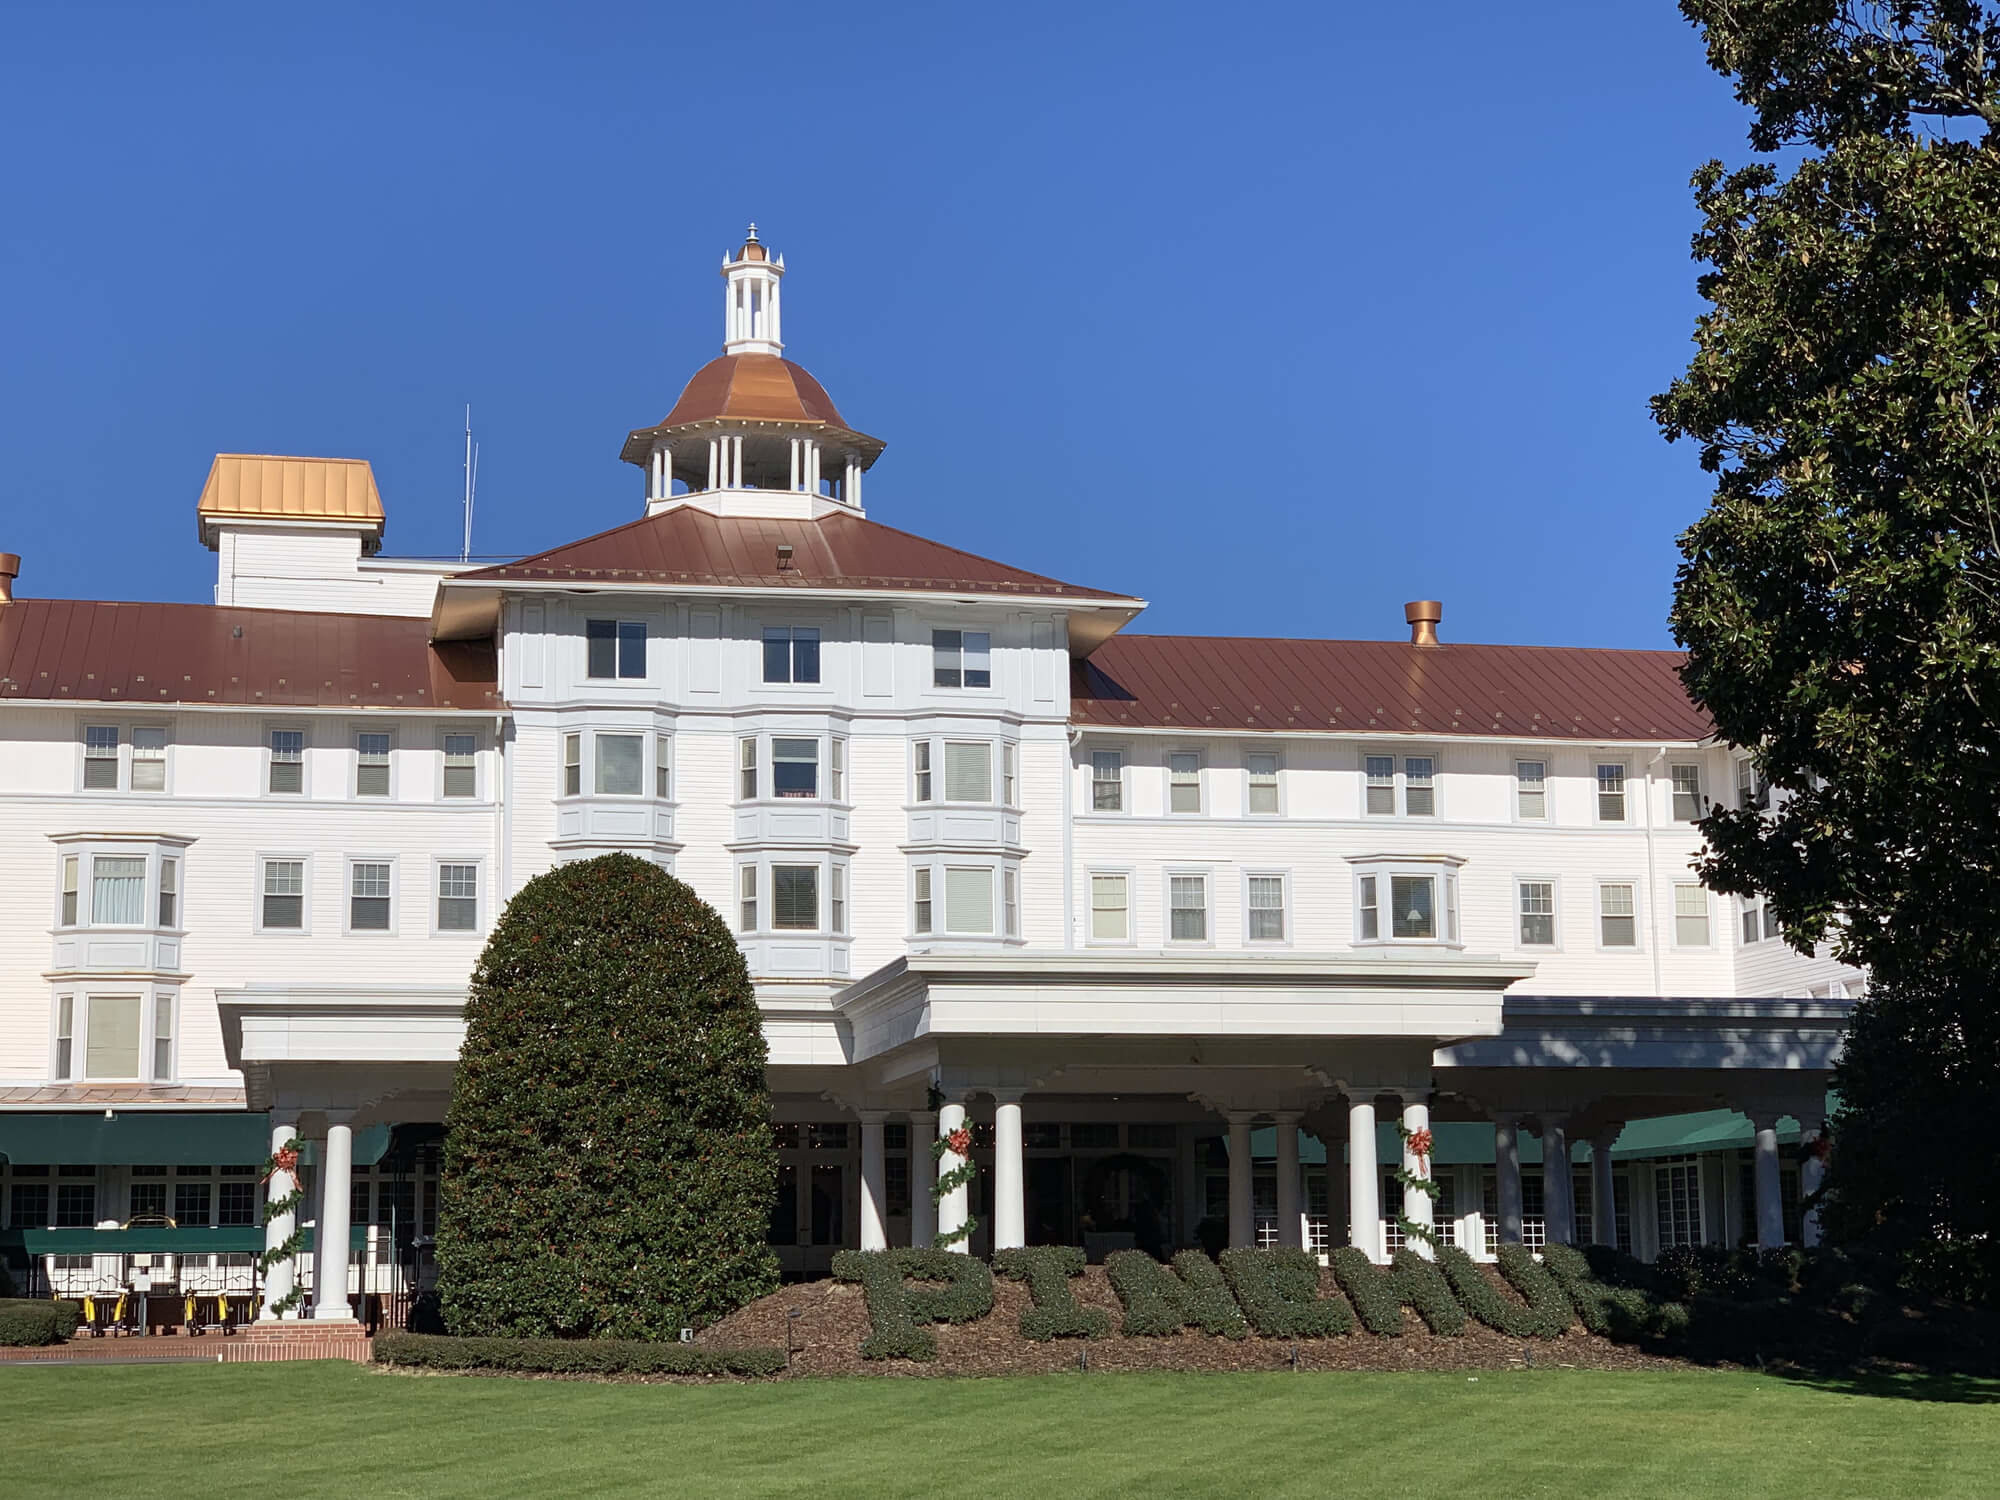 The Pinehurst Resort located in Pinehurst North Carolina is a famous golf resort and clubhouse